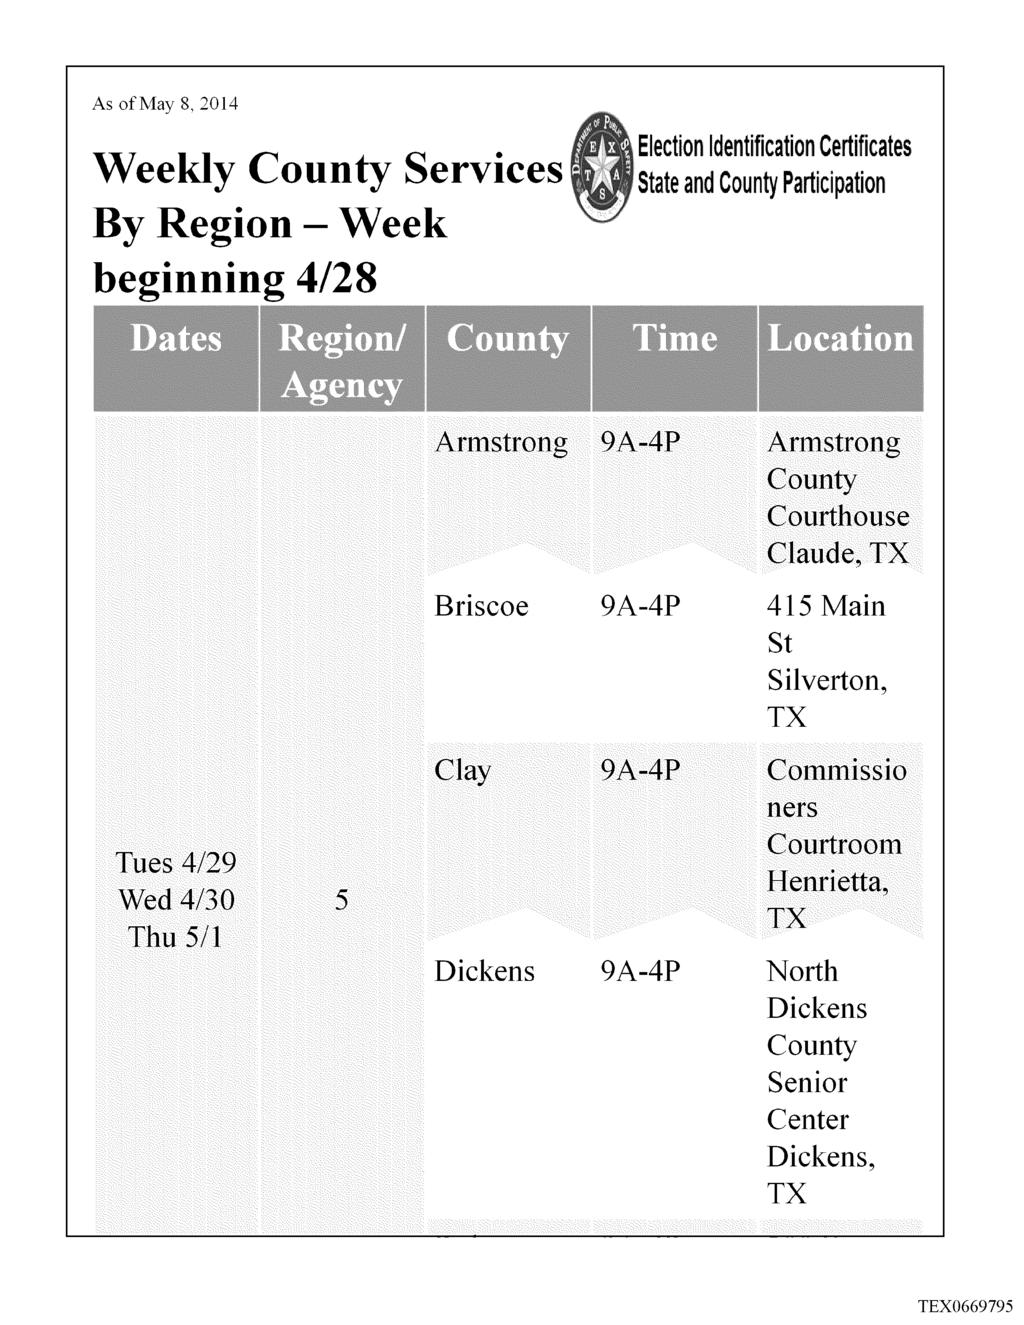 Case :13-cv-00193 Document 790-8 Filed in TXSD on 11/19/14 Page 11 of 1 Weekly Services By Region beginning 48 Week Election Identification Certificates State and Participation